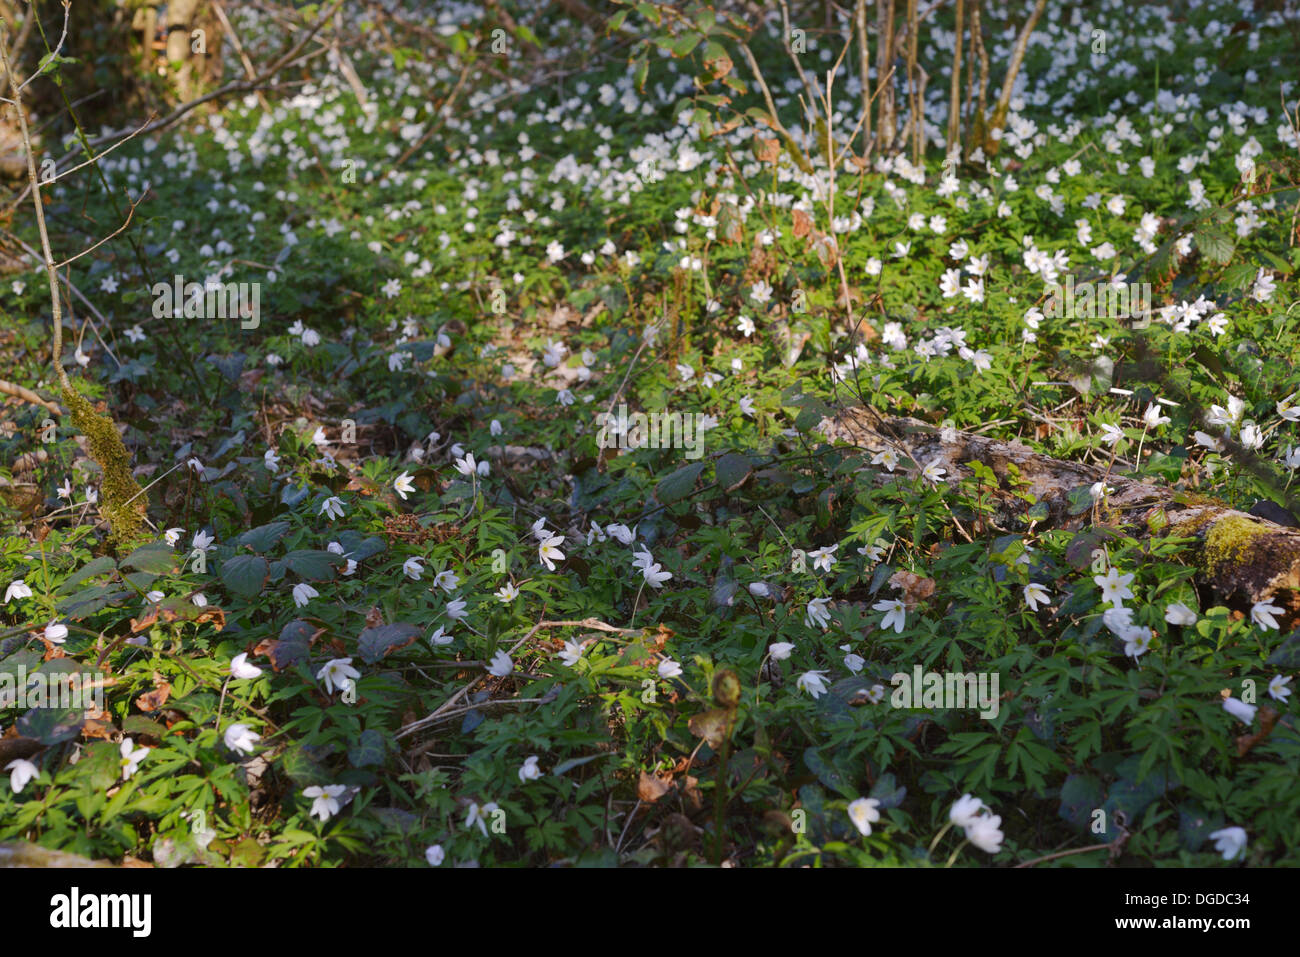 Anemone nemorosa, Wood anemones cover the ground in Ancient Woodland with light shade from deciduous trees, Wales, UK Stock Photo